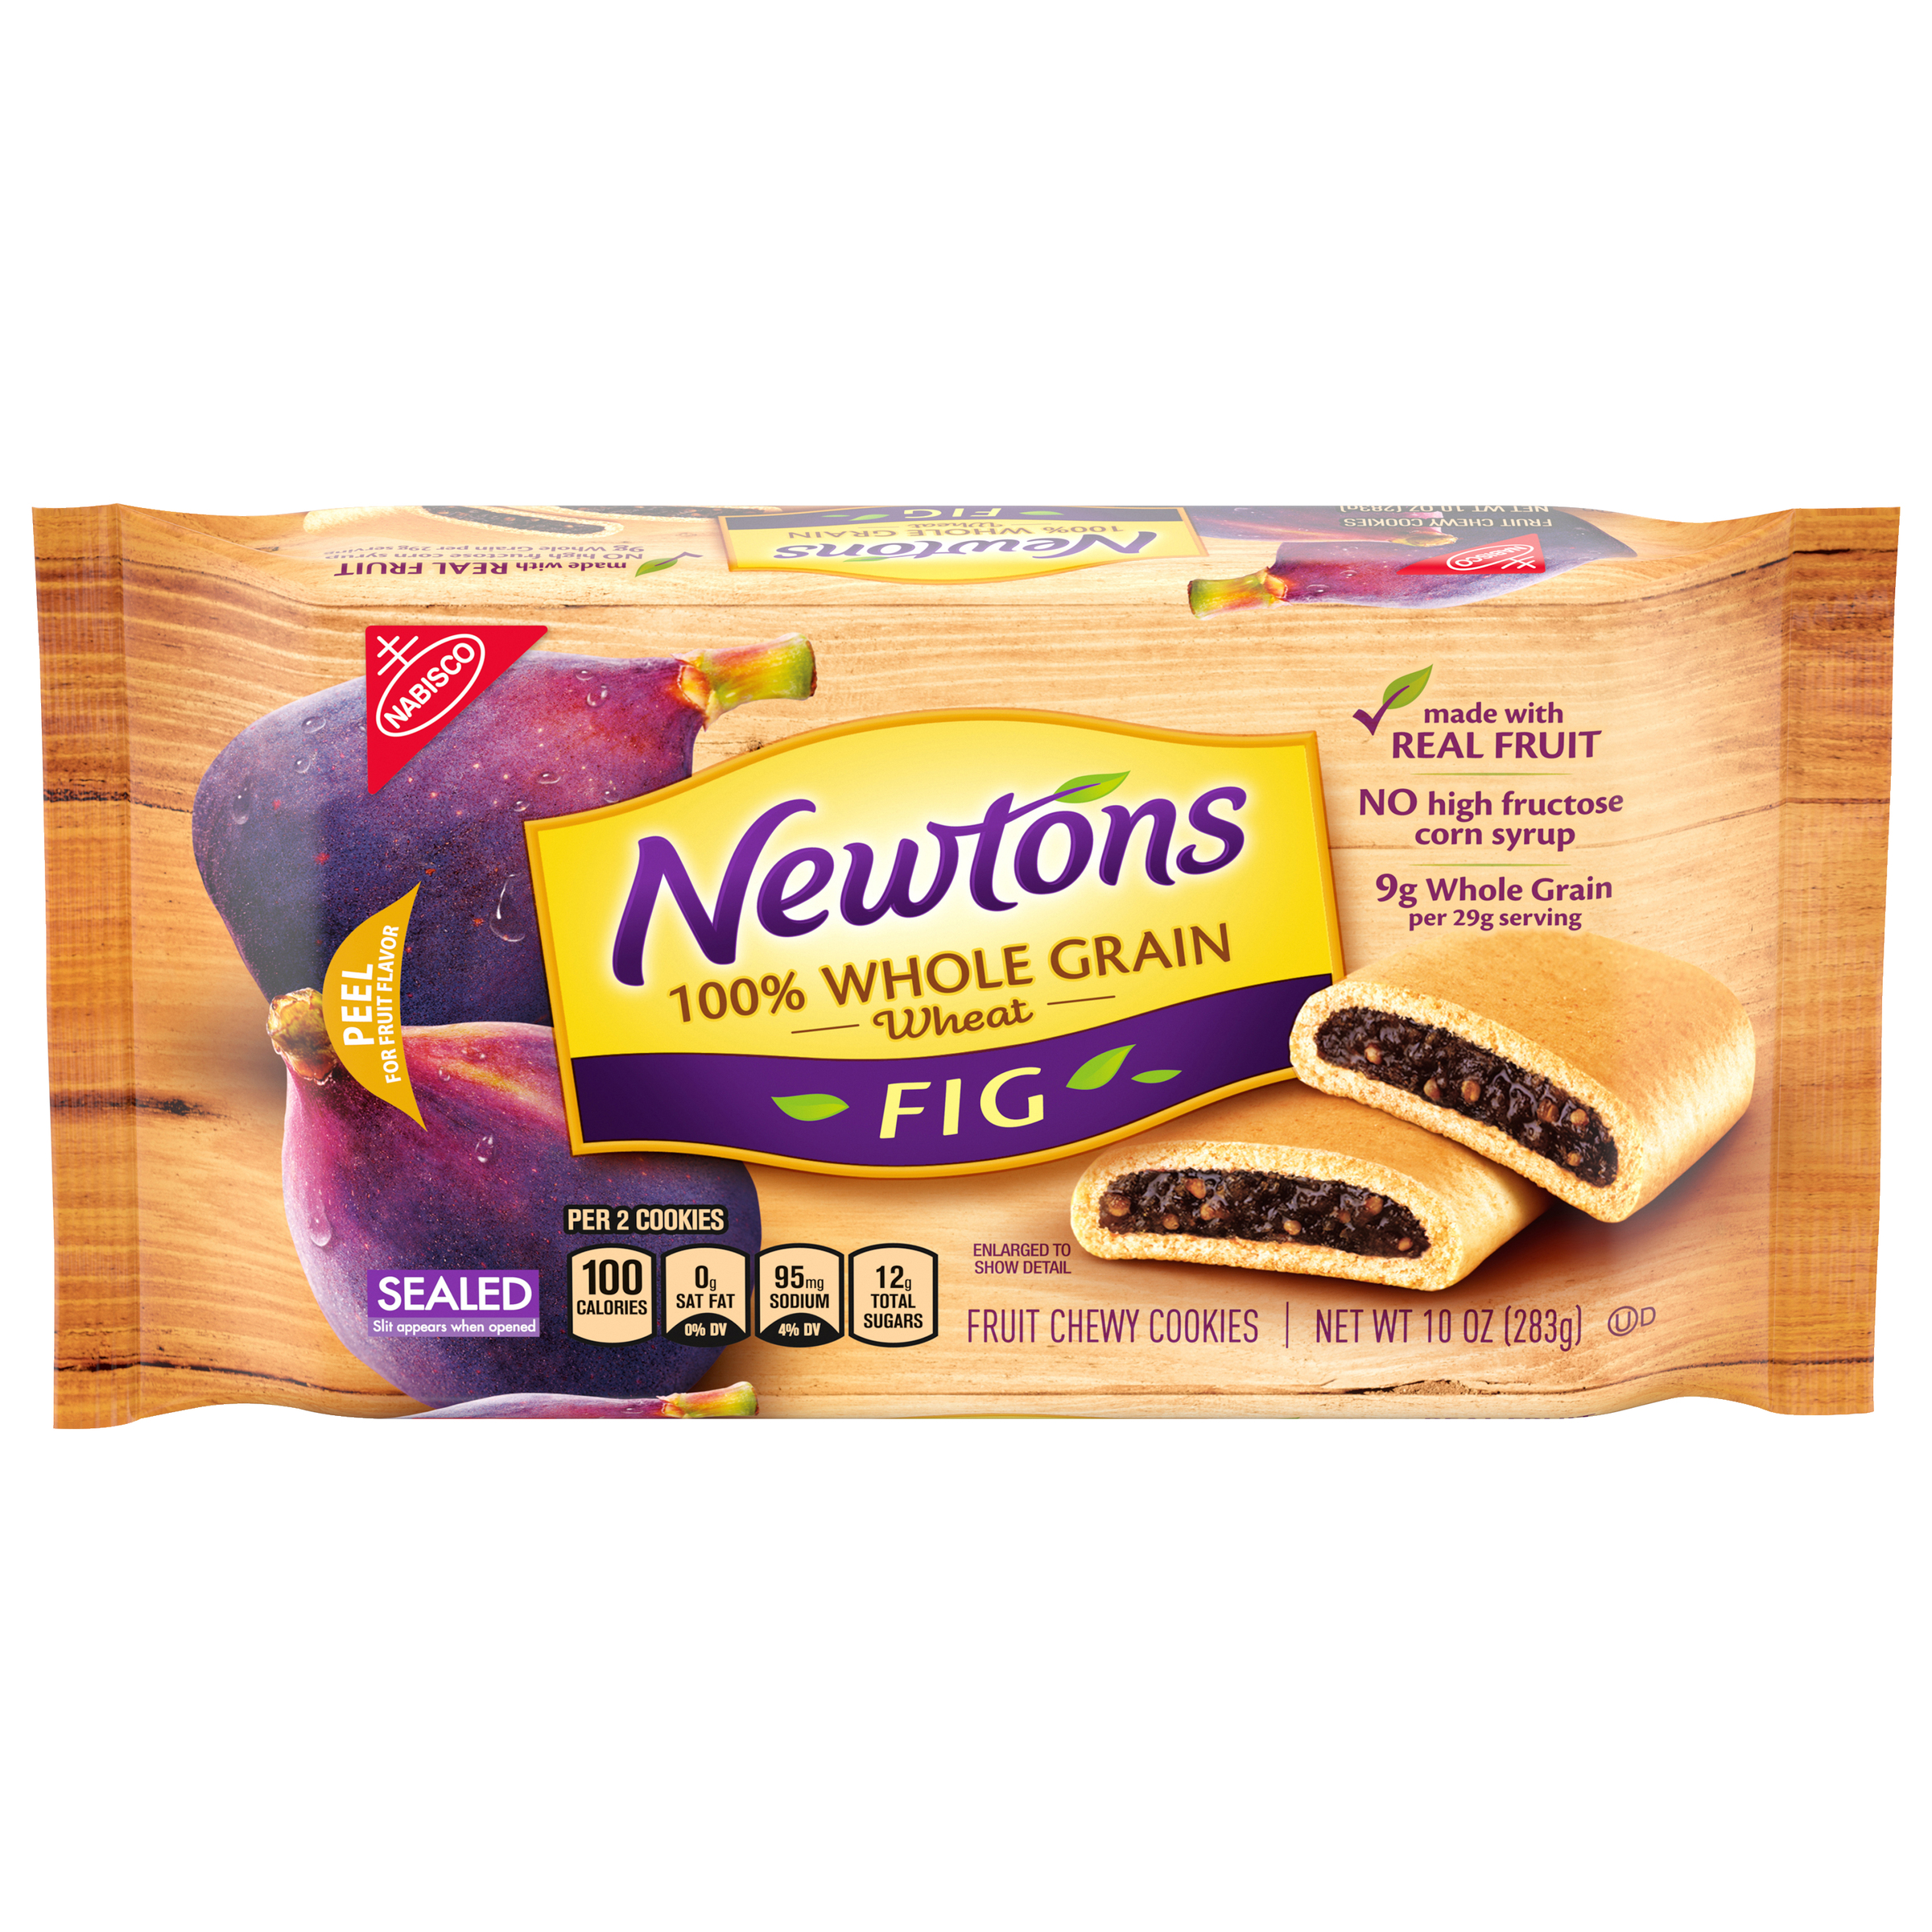 Newtons 100% Whole Grain Wheat Soft & Fruit Chewy Fig Cookies, 10 oz Pack-0